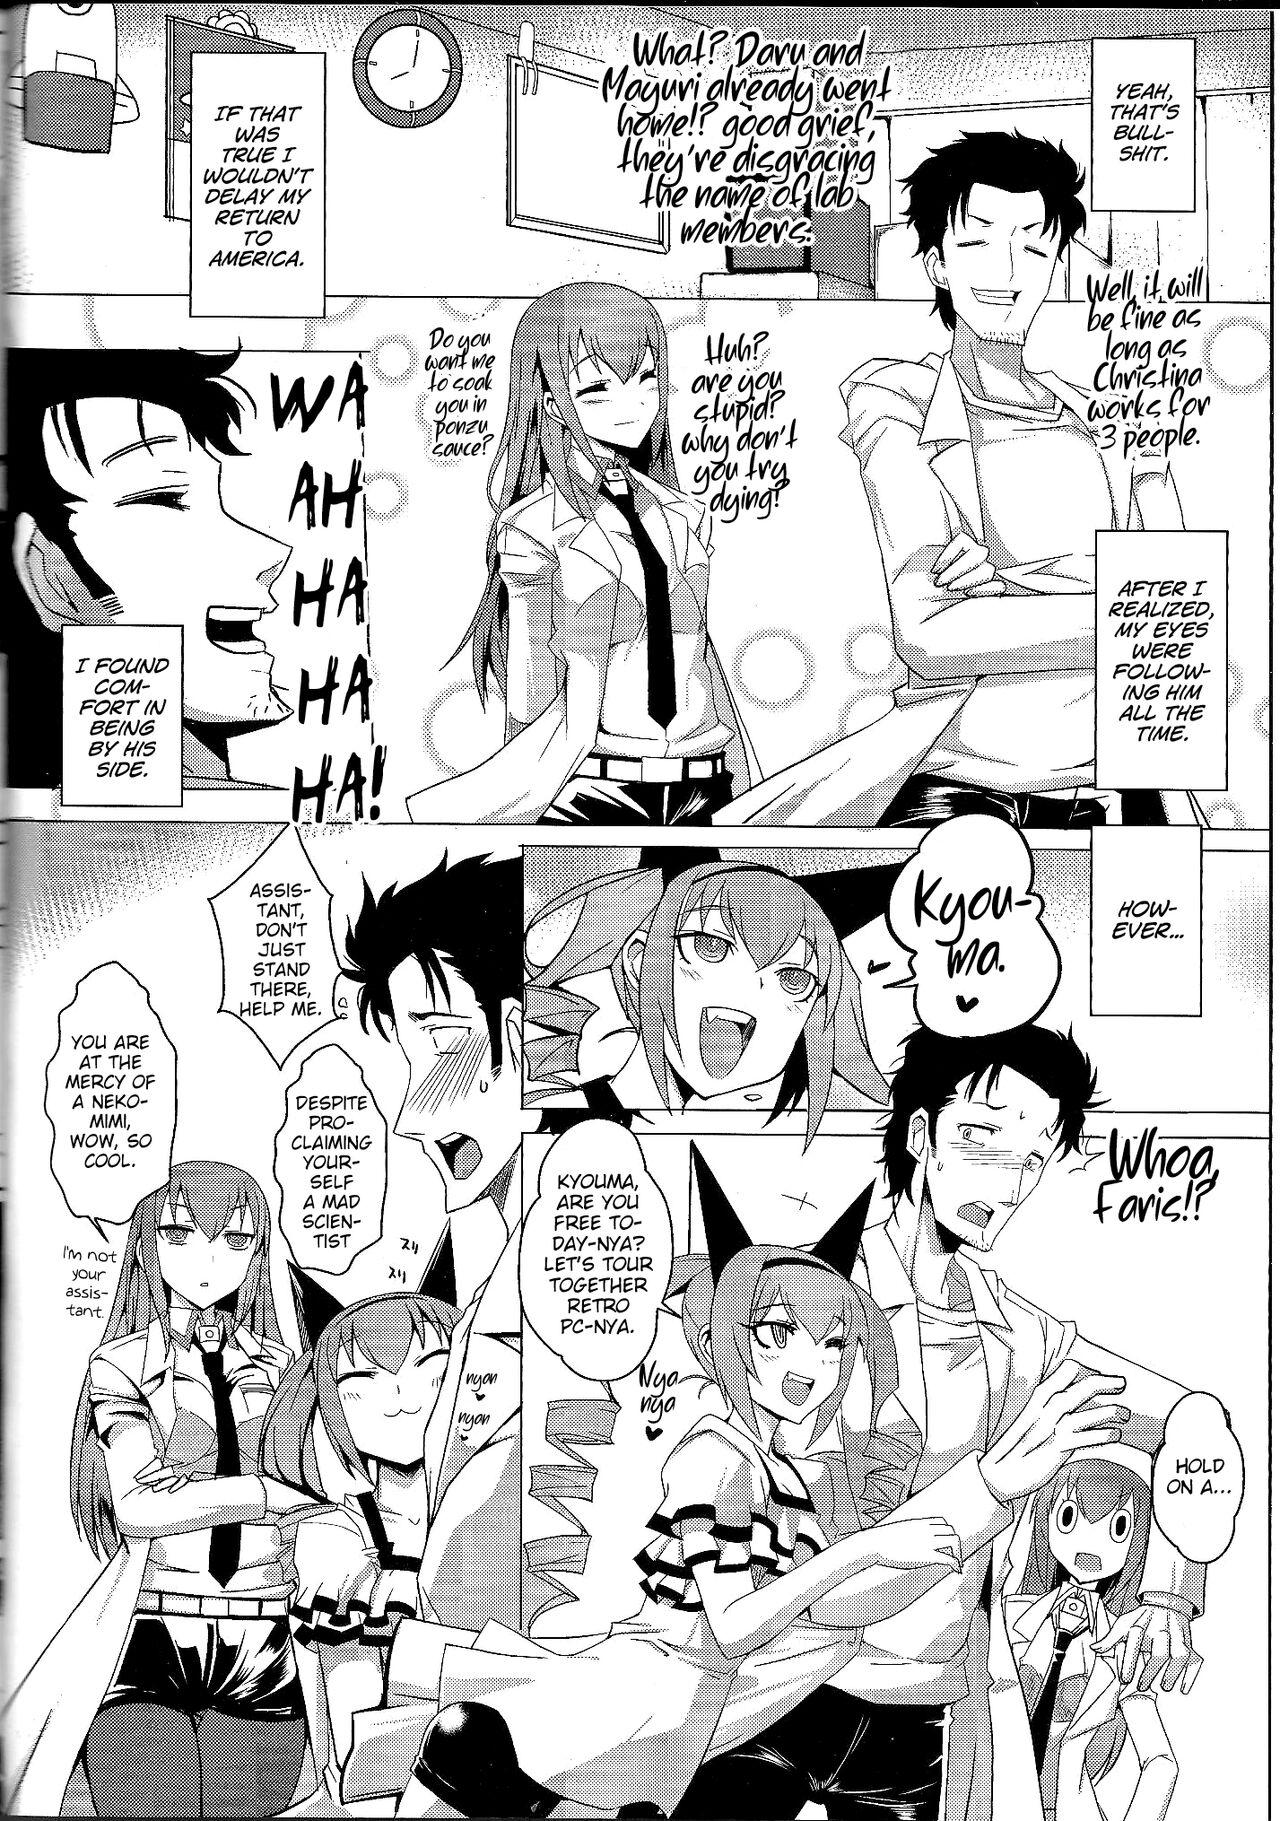 British Kenjin Chijou no Sodoministers - Steinsgate Gang - Page 5